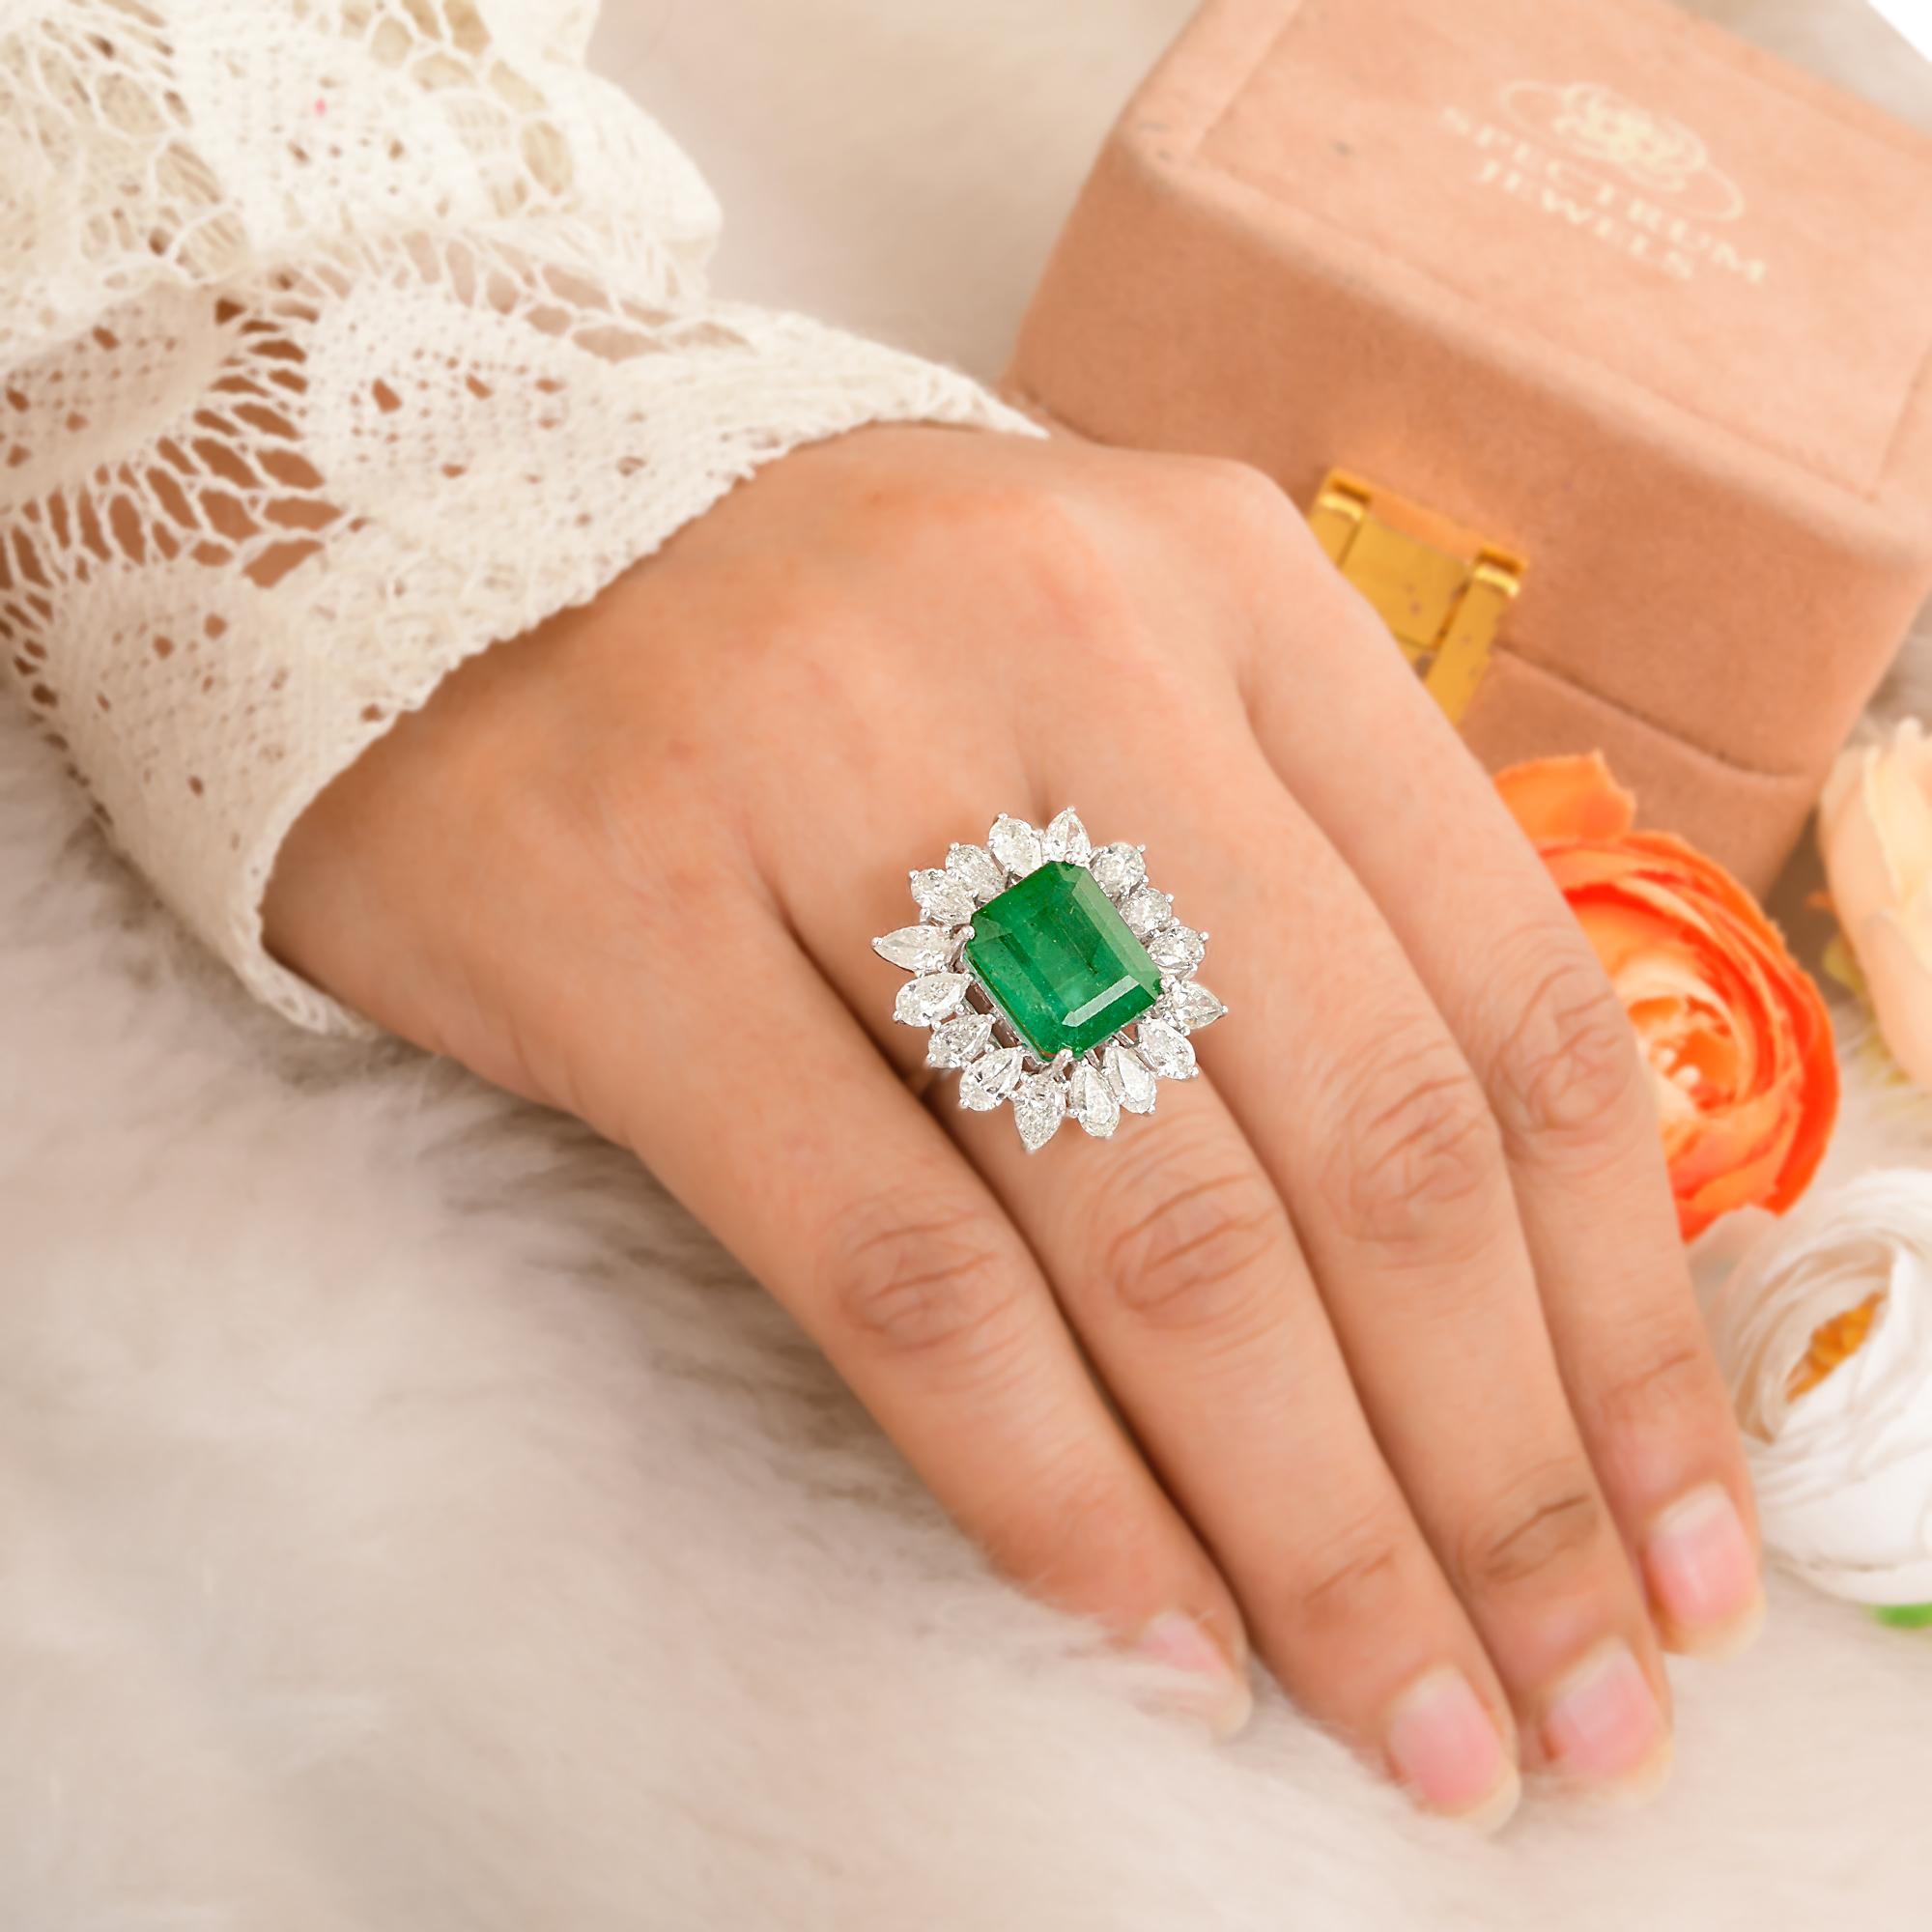 For Sale:  Zambian Emerald Cocktail Ring Pear Diamond Solid 18k White Gold Fine Jewelry 5